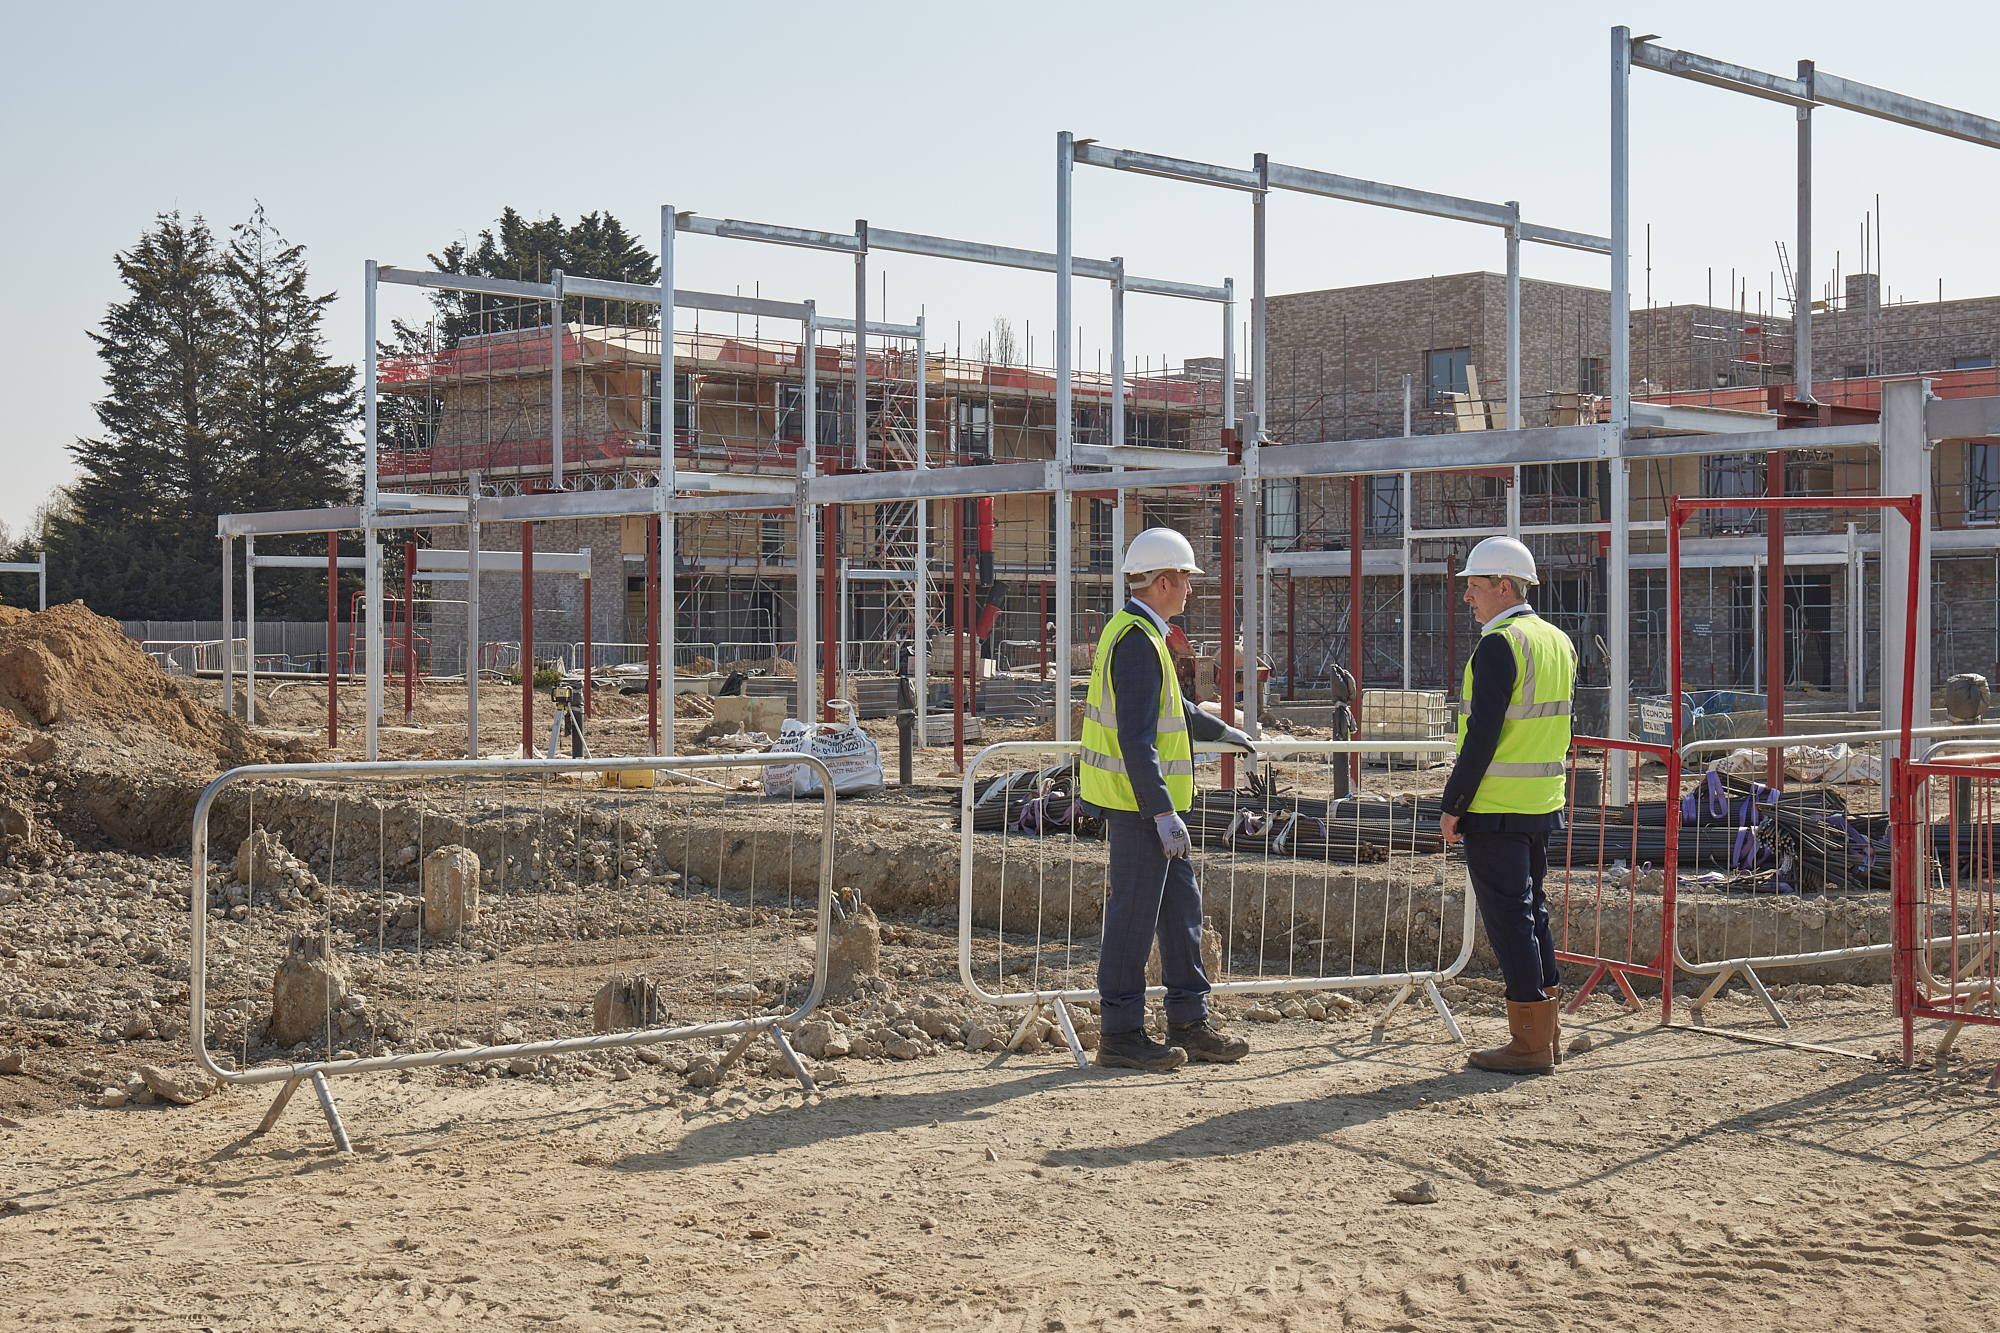 Creating a new home of learning for the University of Cambridge’s brightest minds